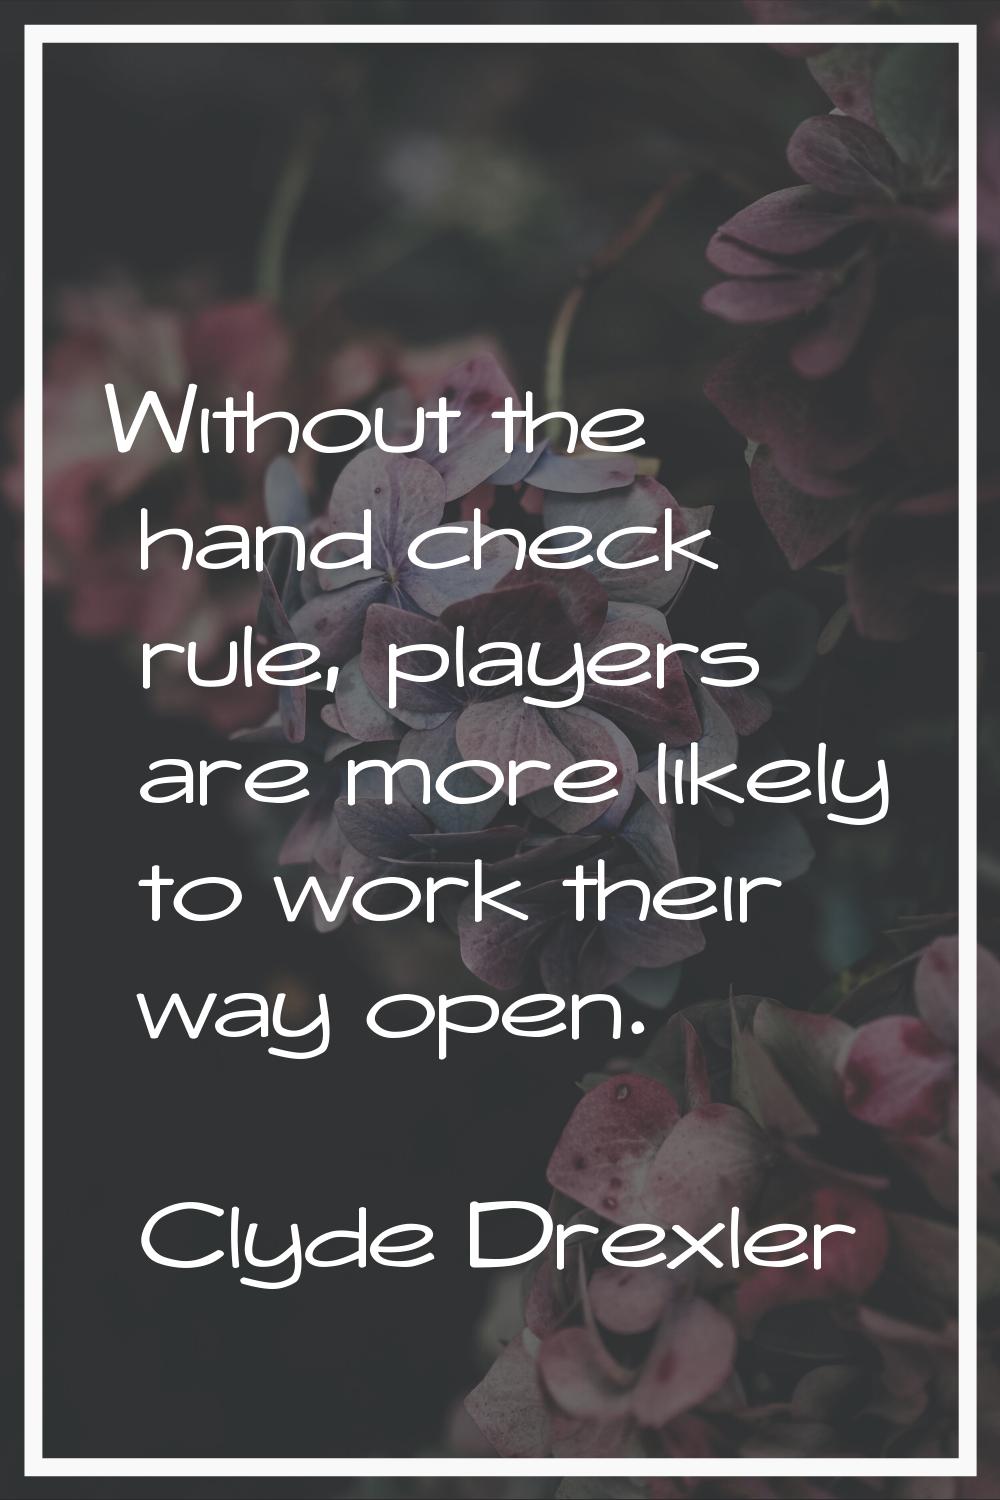 Without the hand check rule, players are more likely to work their way open.